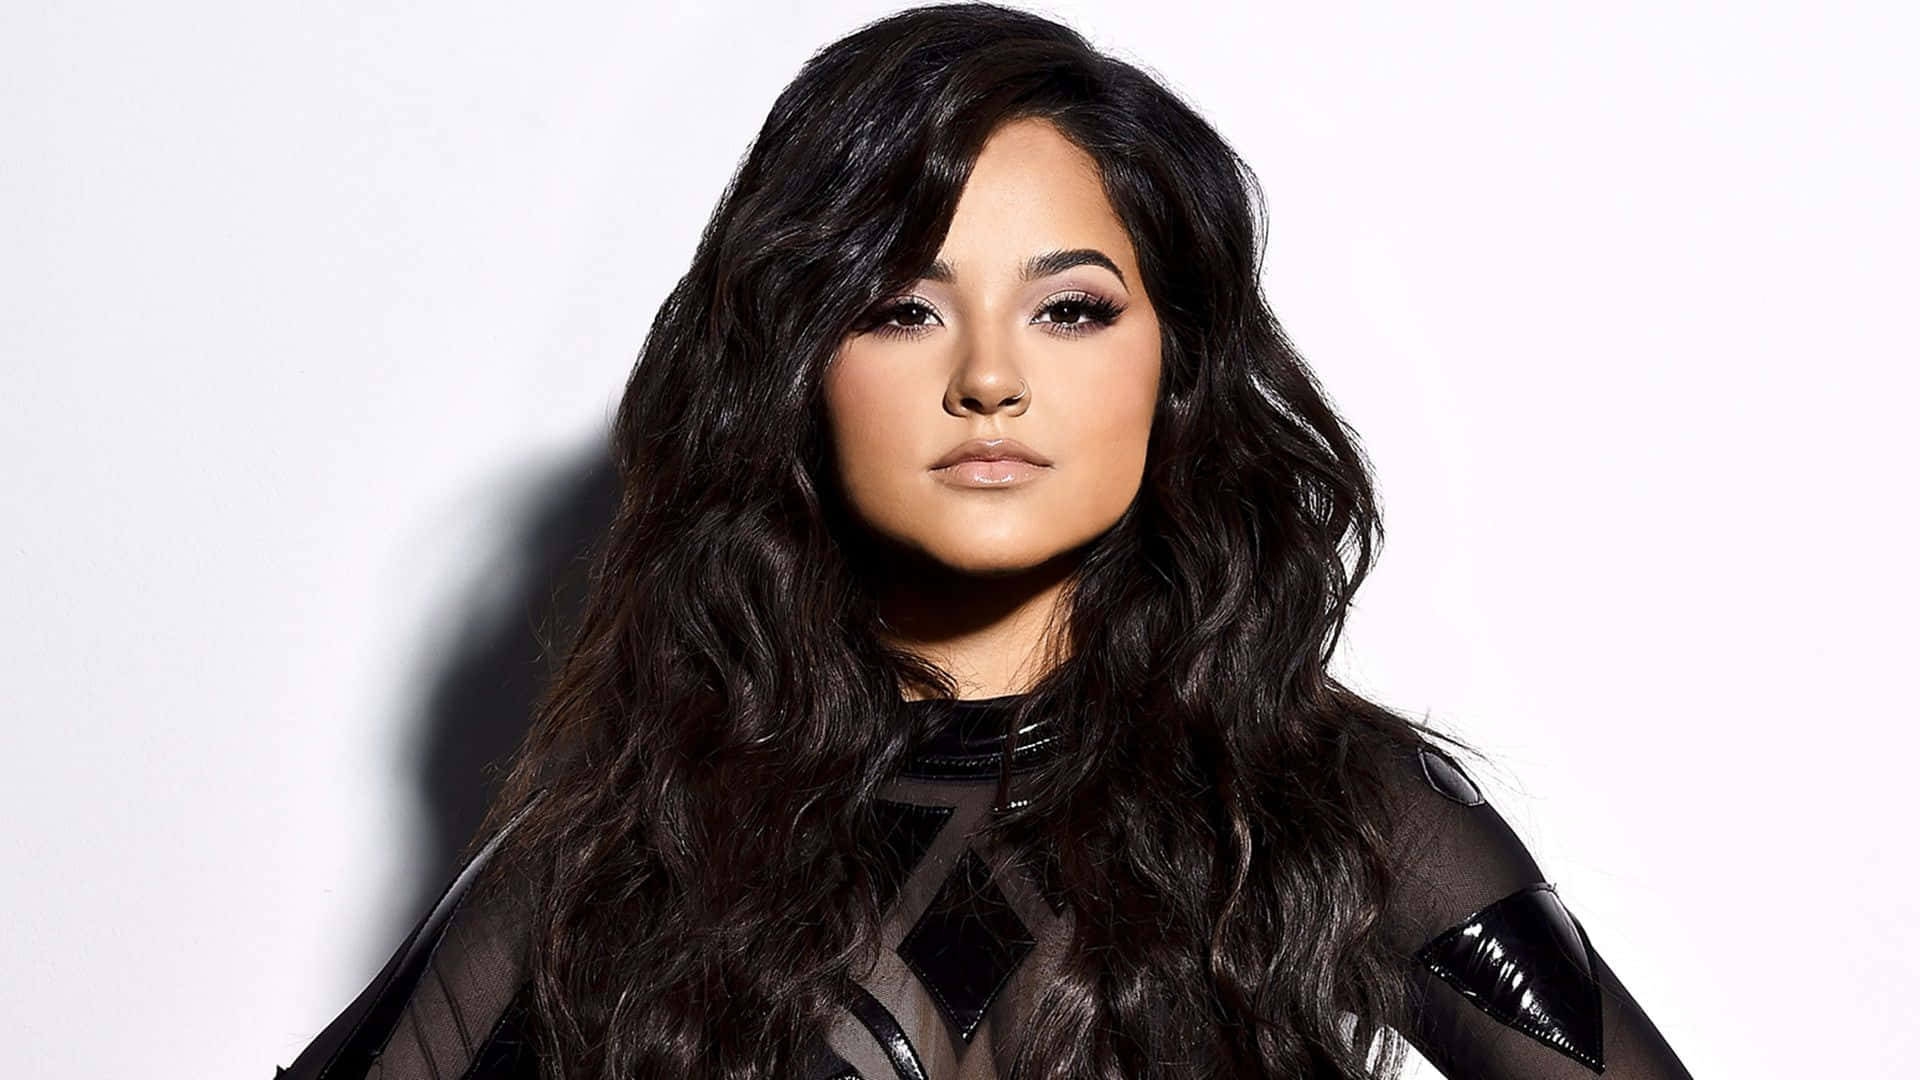 Becky G looking stylish and glamorous